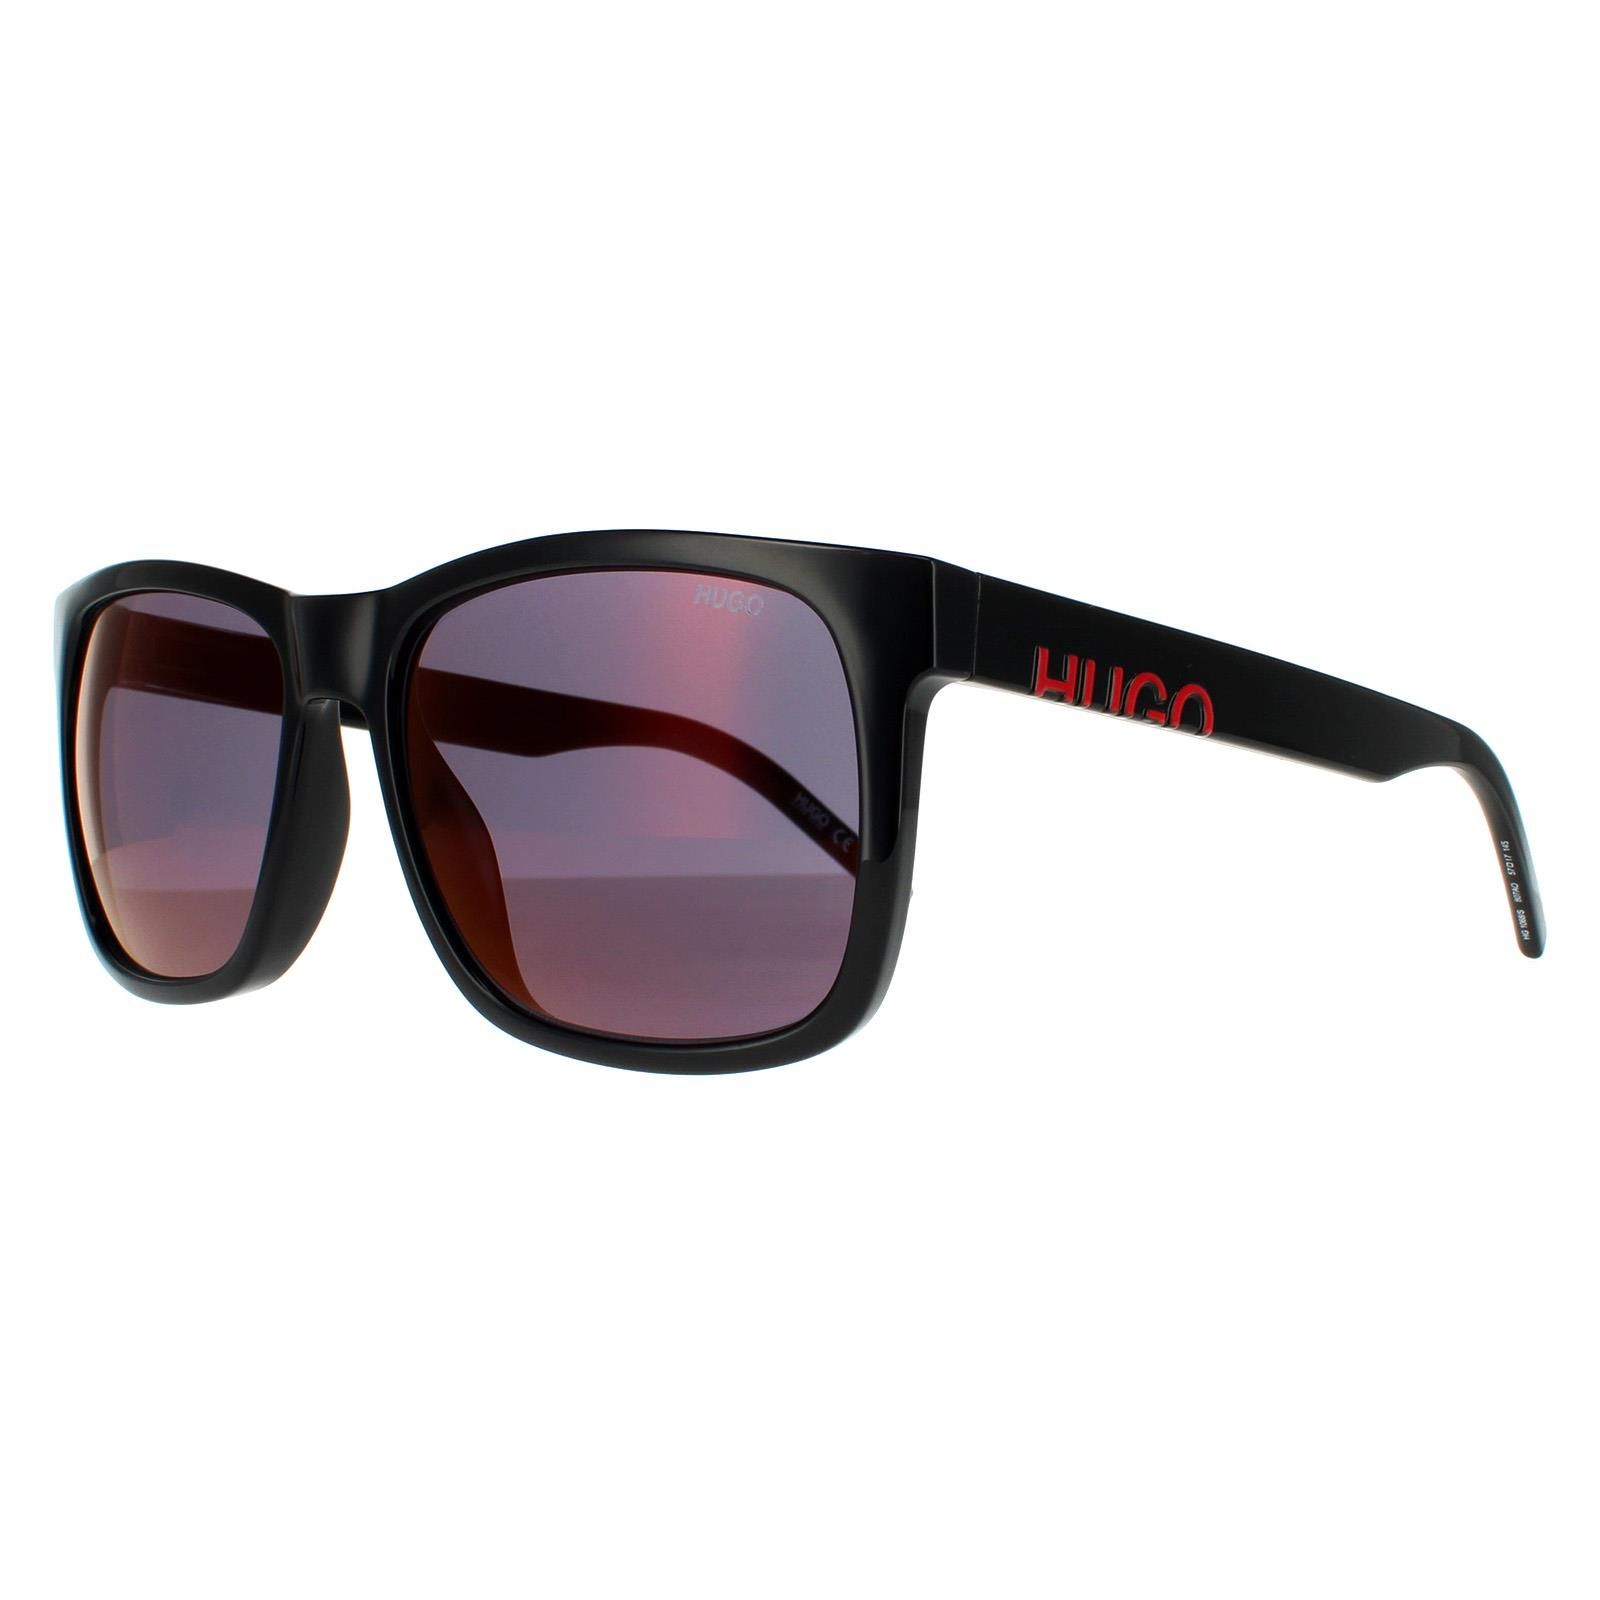 Hugo by Hugo Boss Sunglasses HG 1068/S 807 AO Black Red Mirror are a lightweight modern square style with Hugo branded temples.